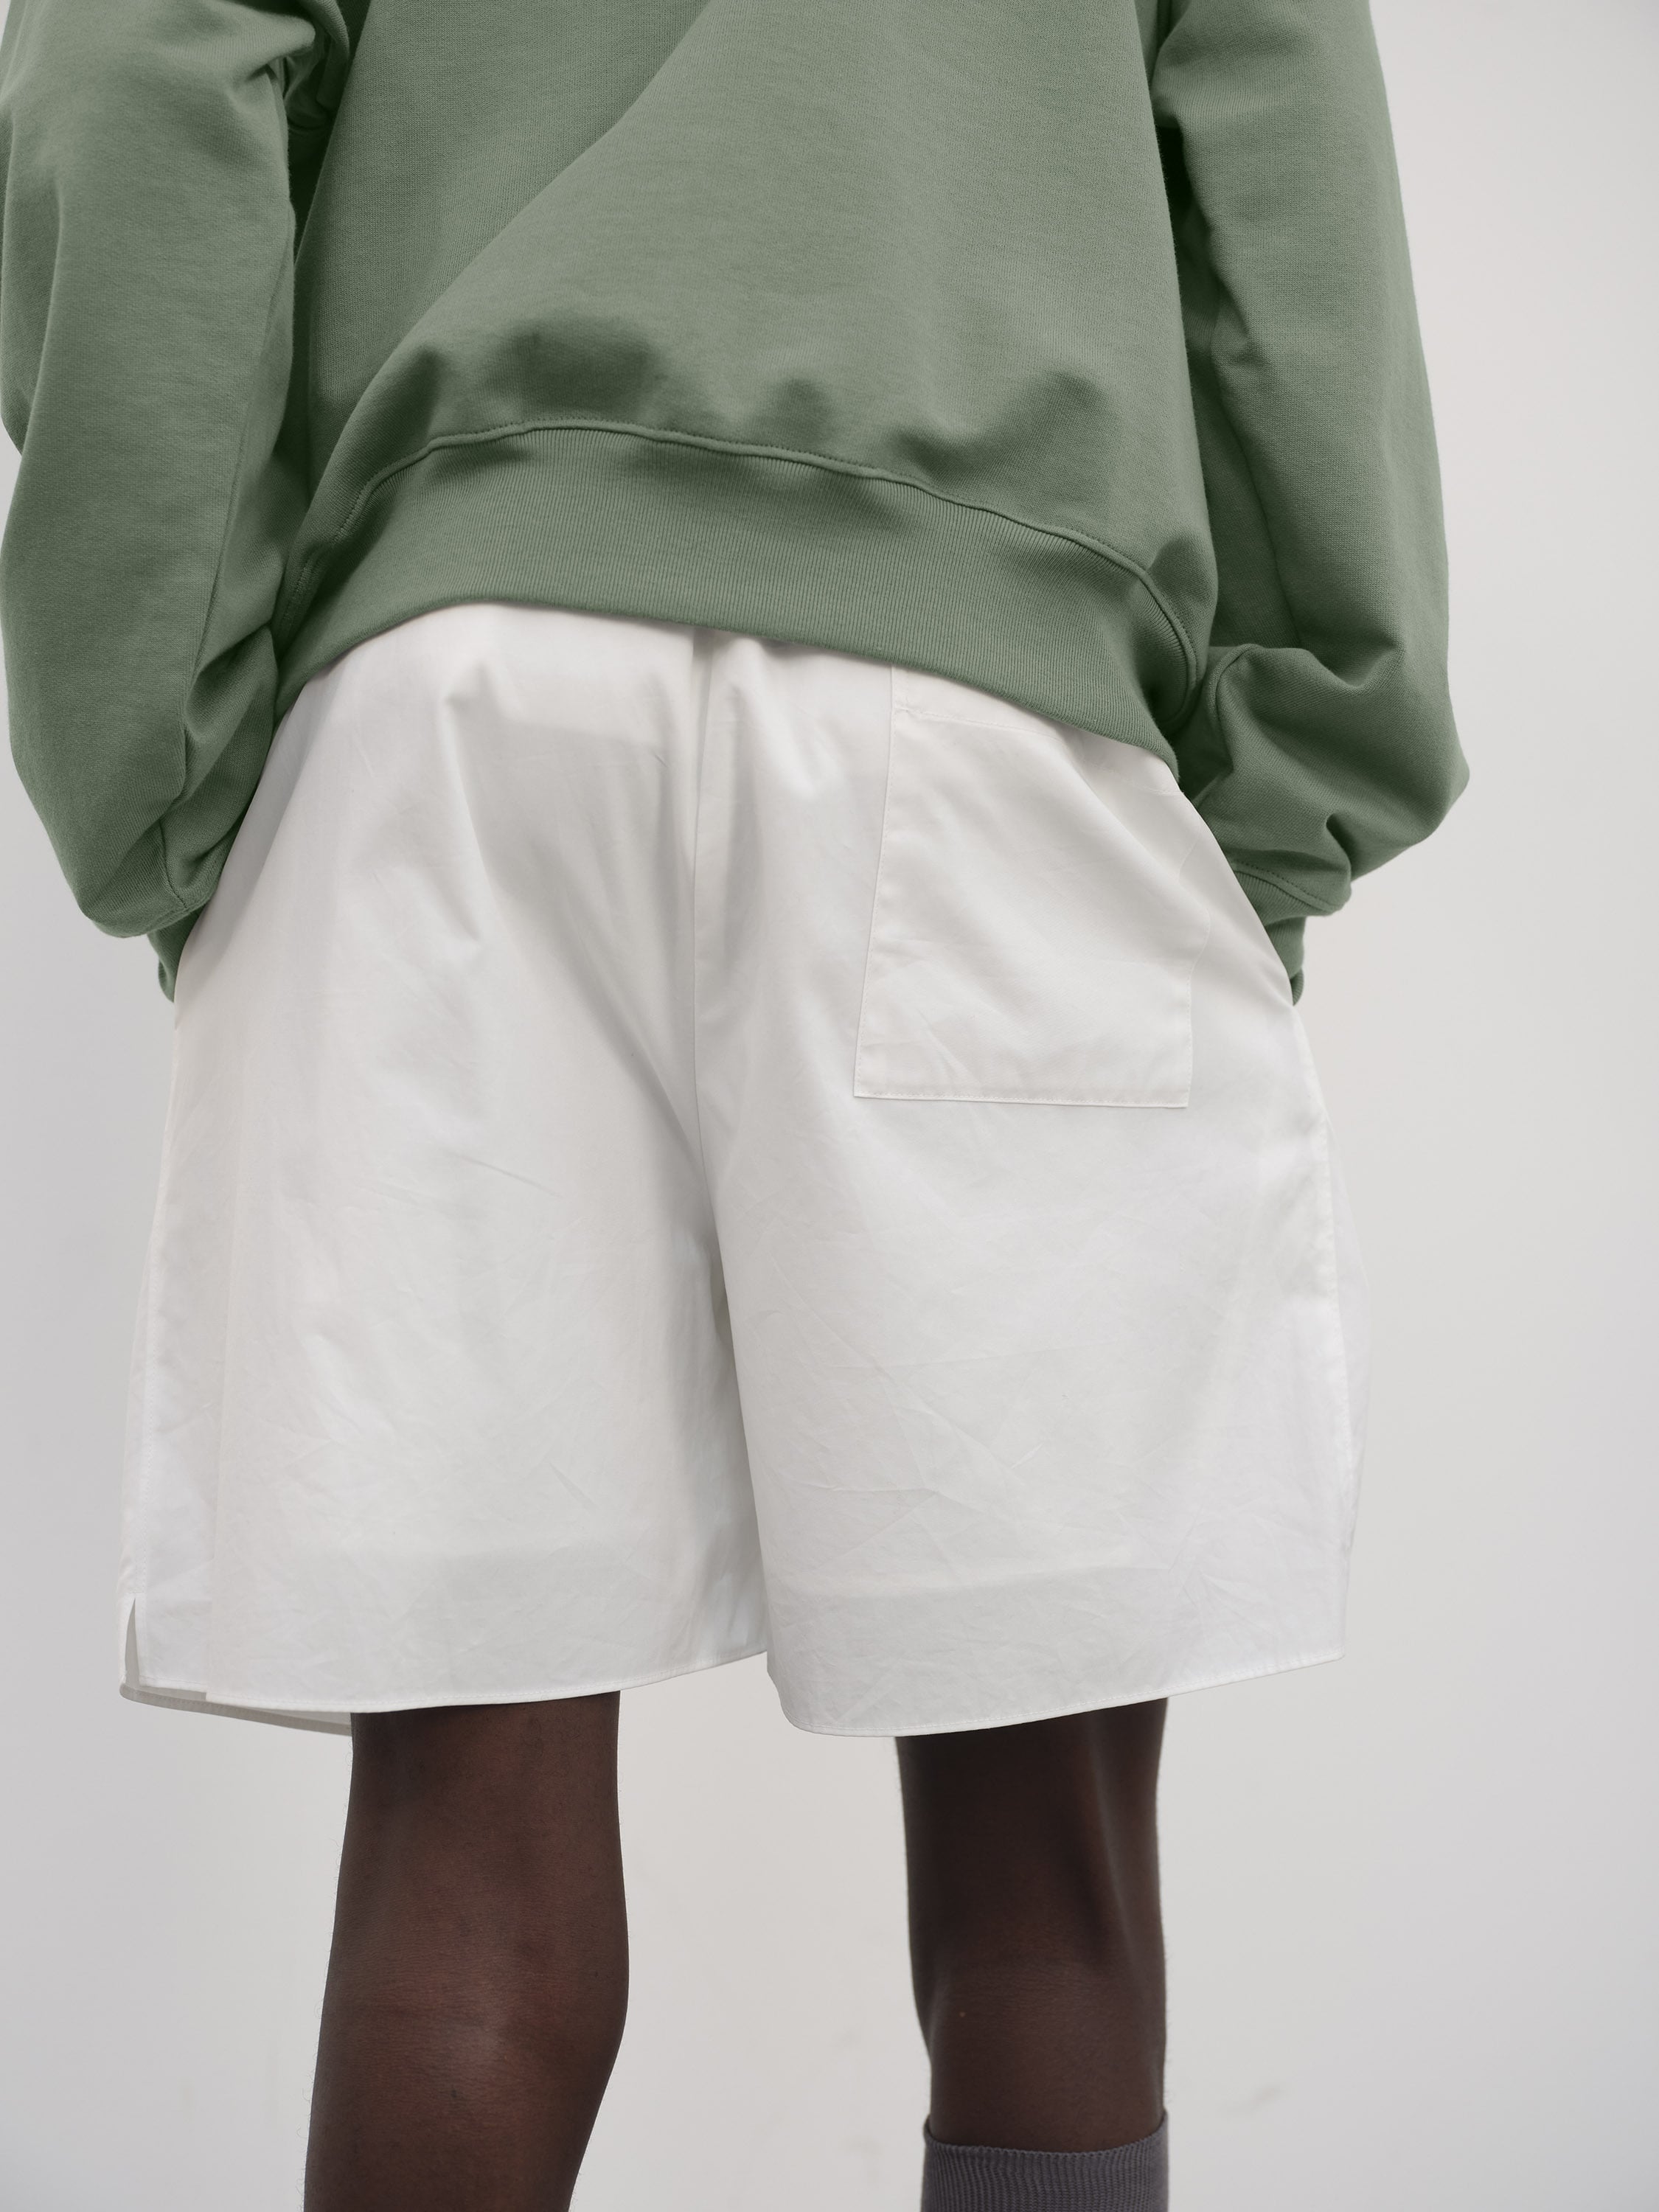 HIGH COUNT FINX OX SHORTS 詳細画像 WHITE 3